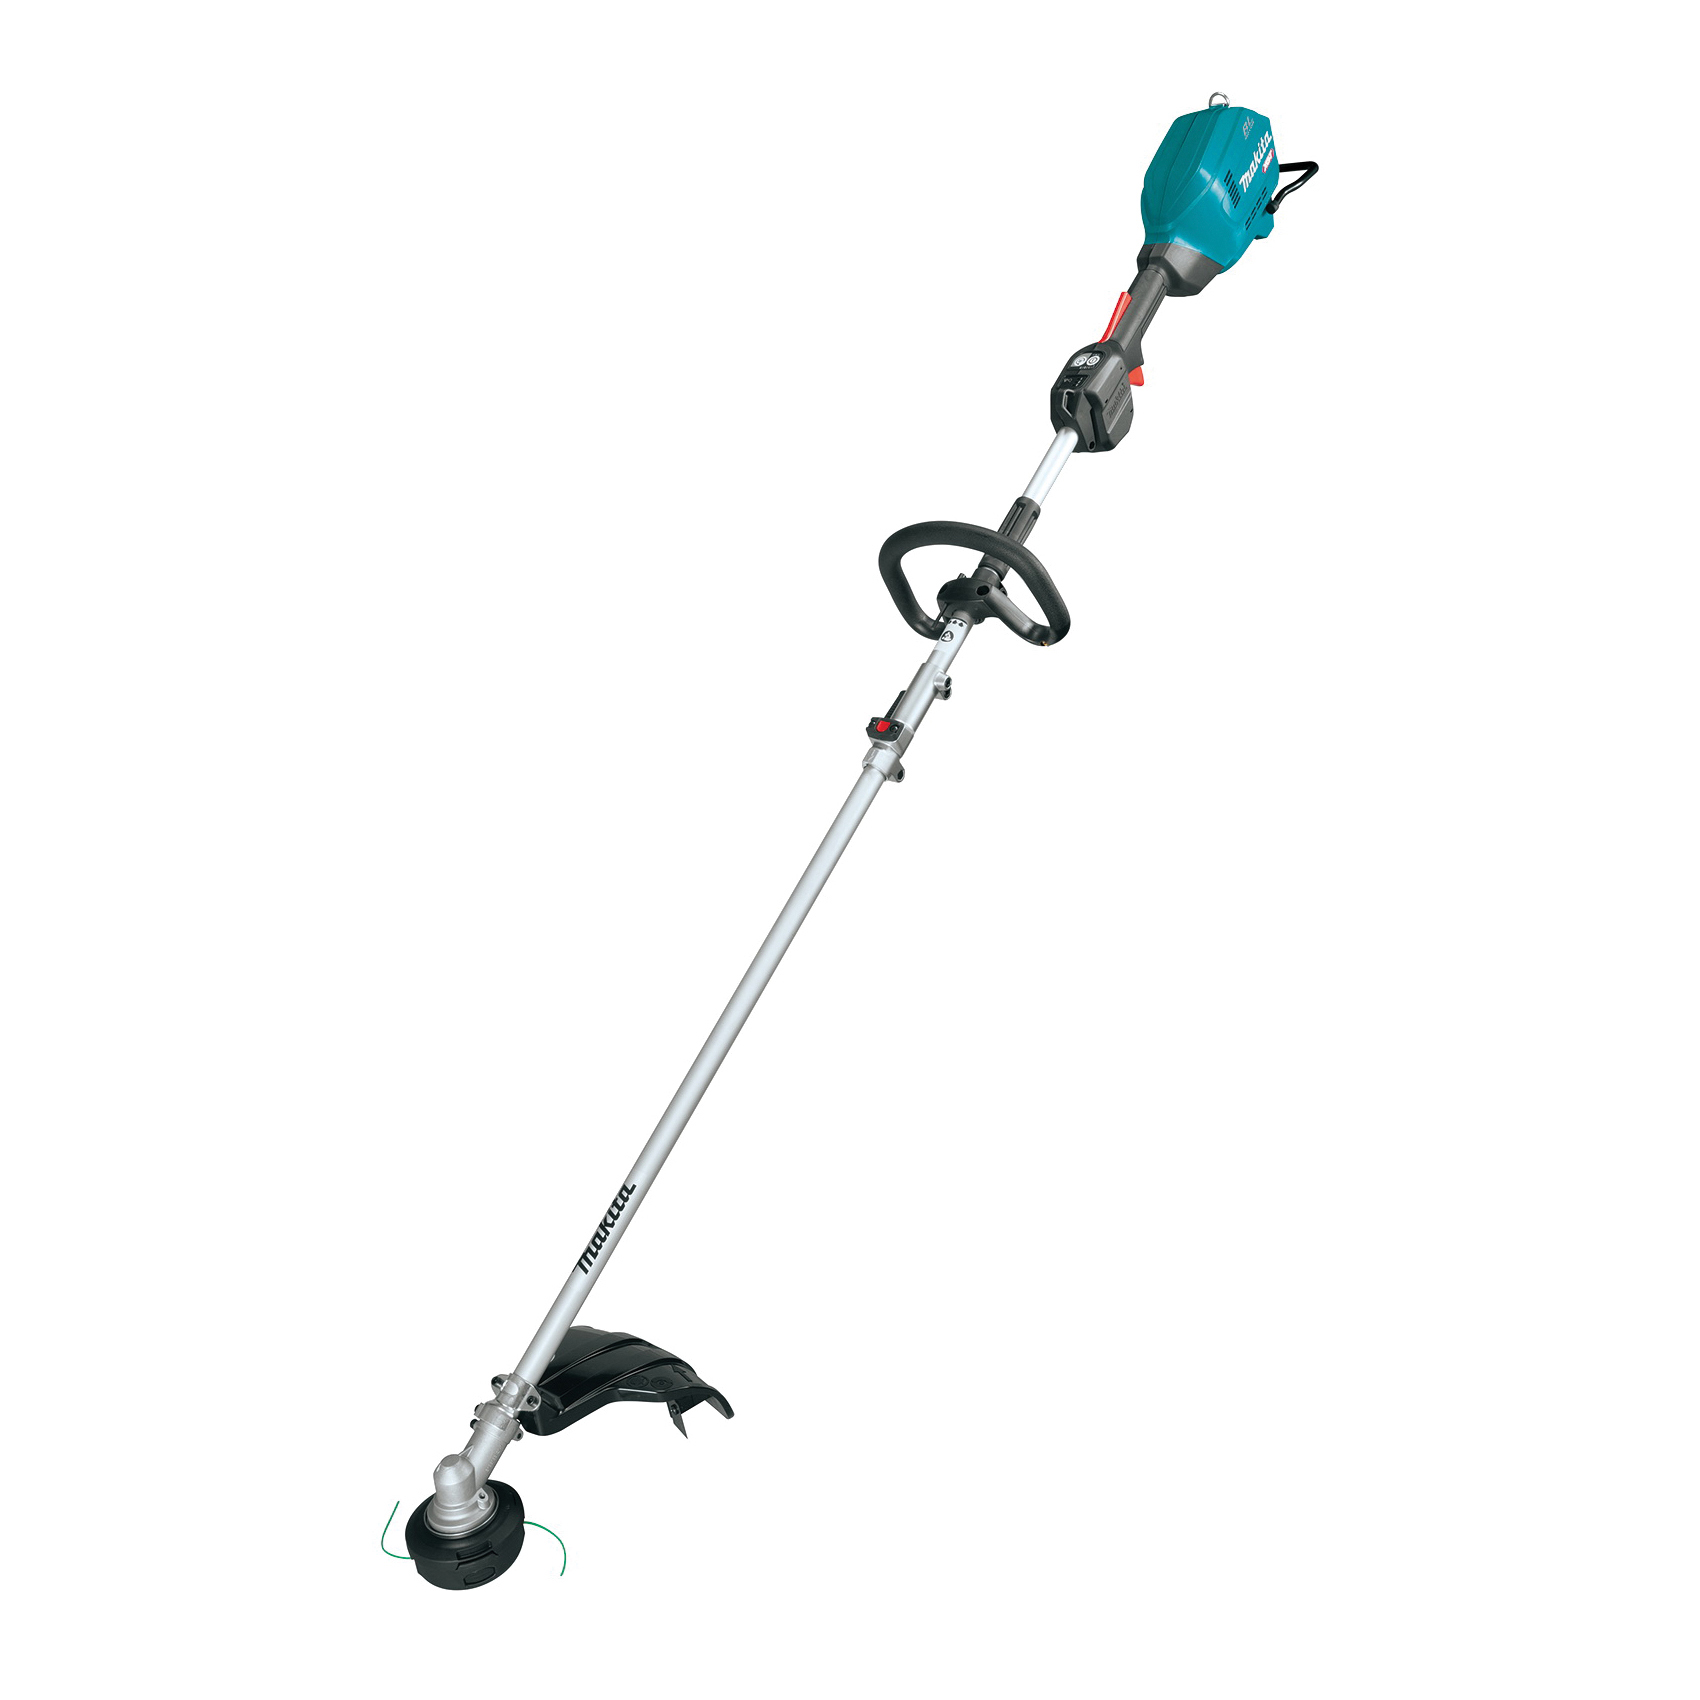 Makita XGT Series GUX01ZX1 Power Head, Tool Only, 6 Ah, 40 V, Lithium-Ion, 3-Speed, 35 in L Shaft